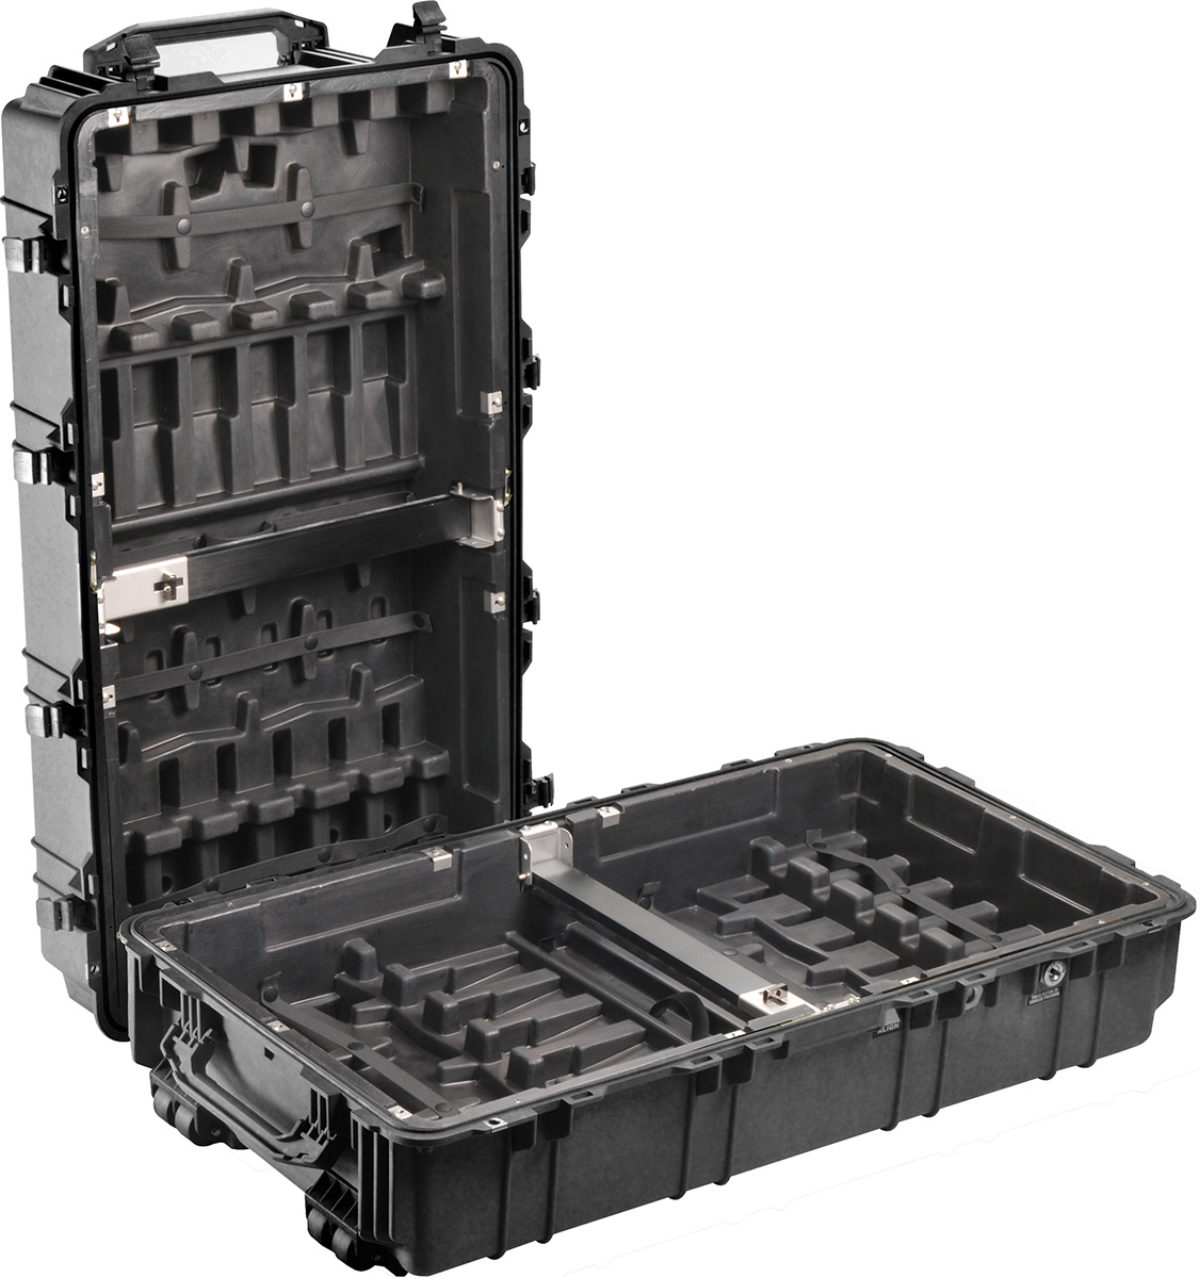 Pelican Transport Cases, Pelican Hard Cases for Sale, Protective 